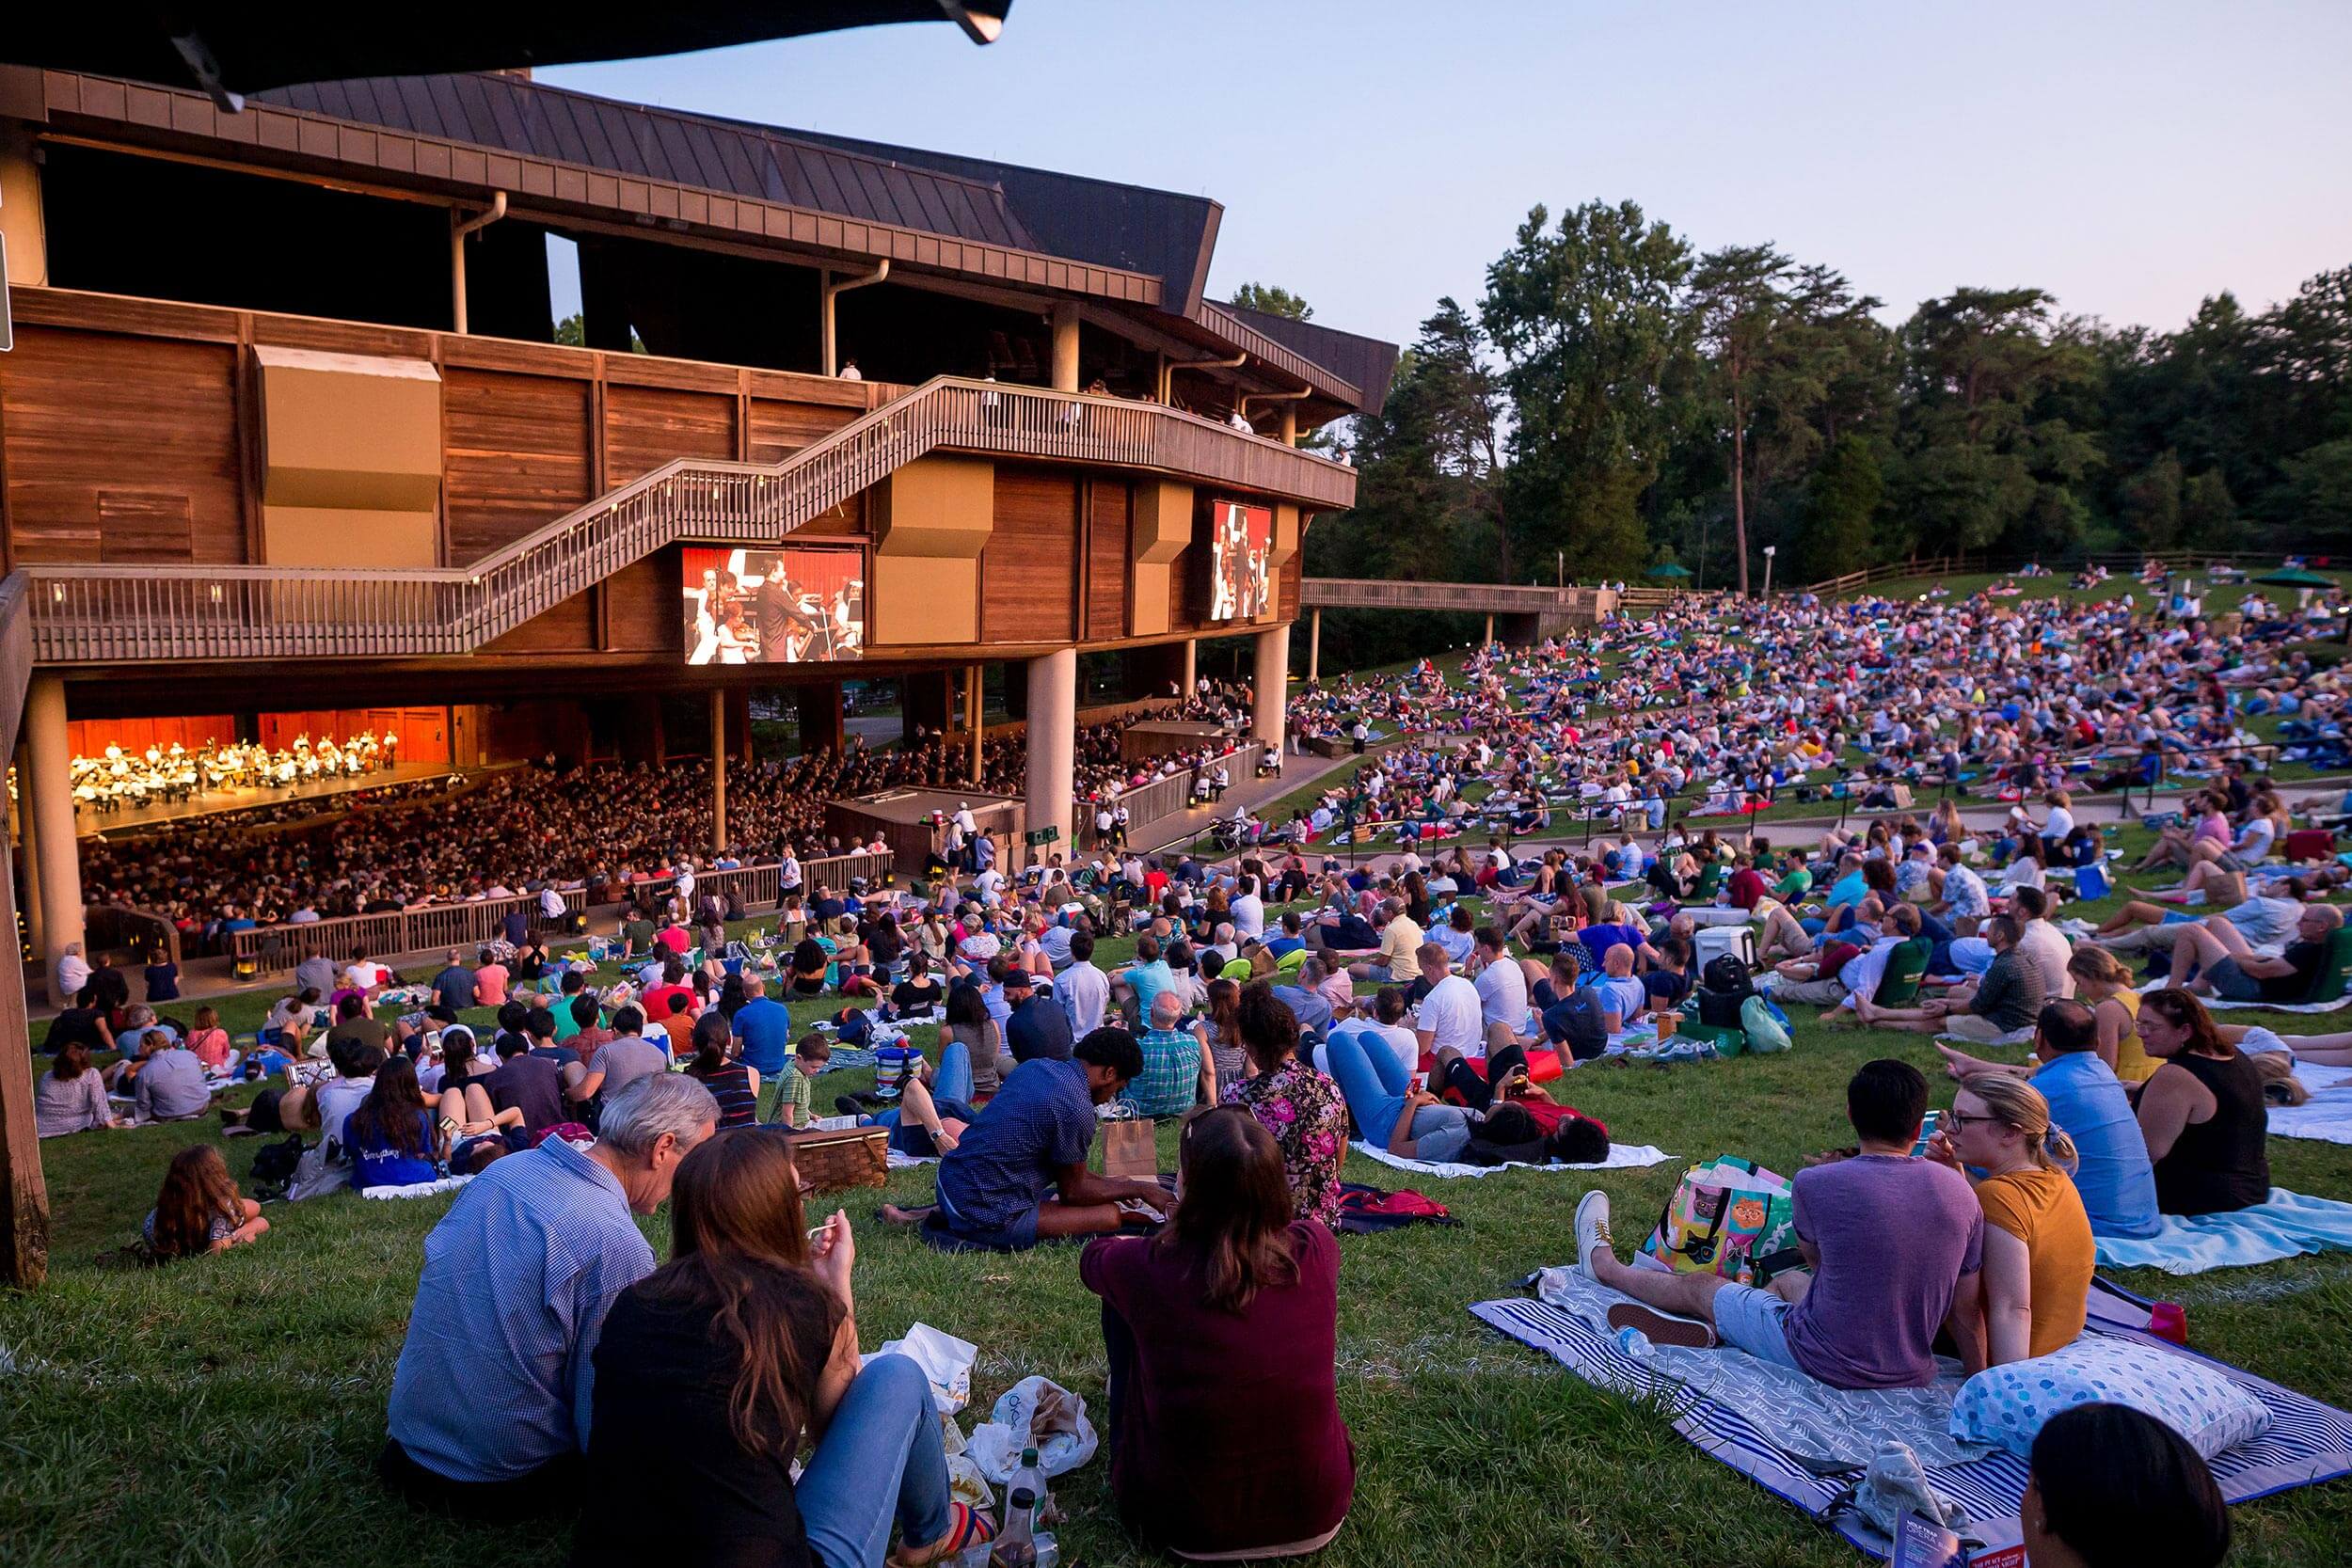 people participating in fun activities in northern virginia, such as watching outdoor movies